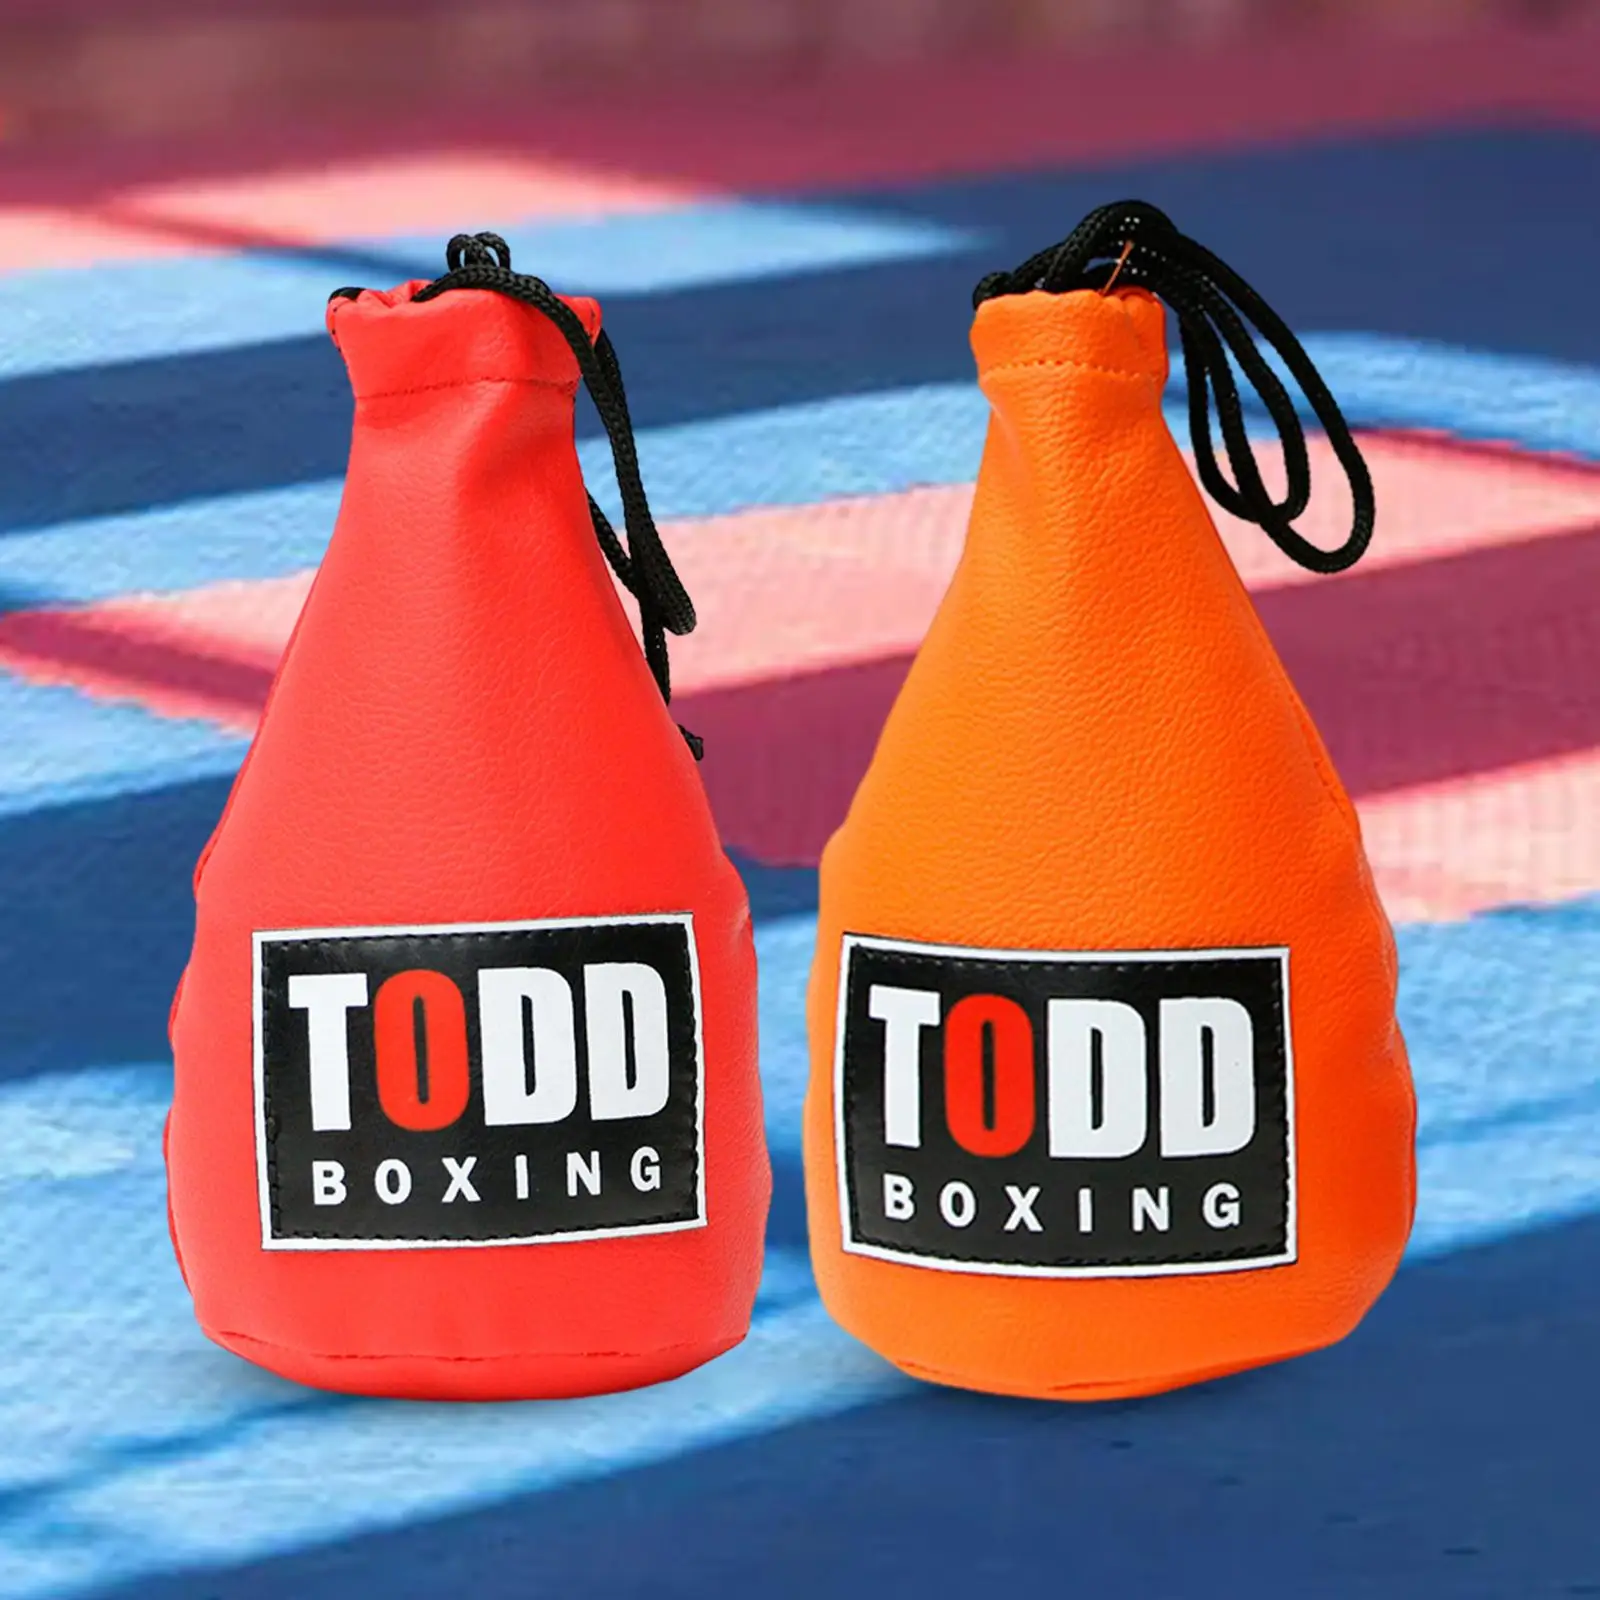 Boxing Dodge Training Bag Men Women Gear Boxing Punch Bag for Reaction Hand Eye Coordination Punching Speed Skill Home Gym